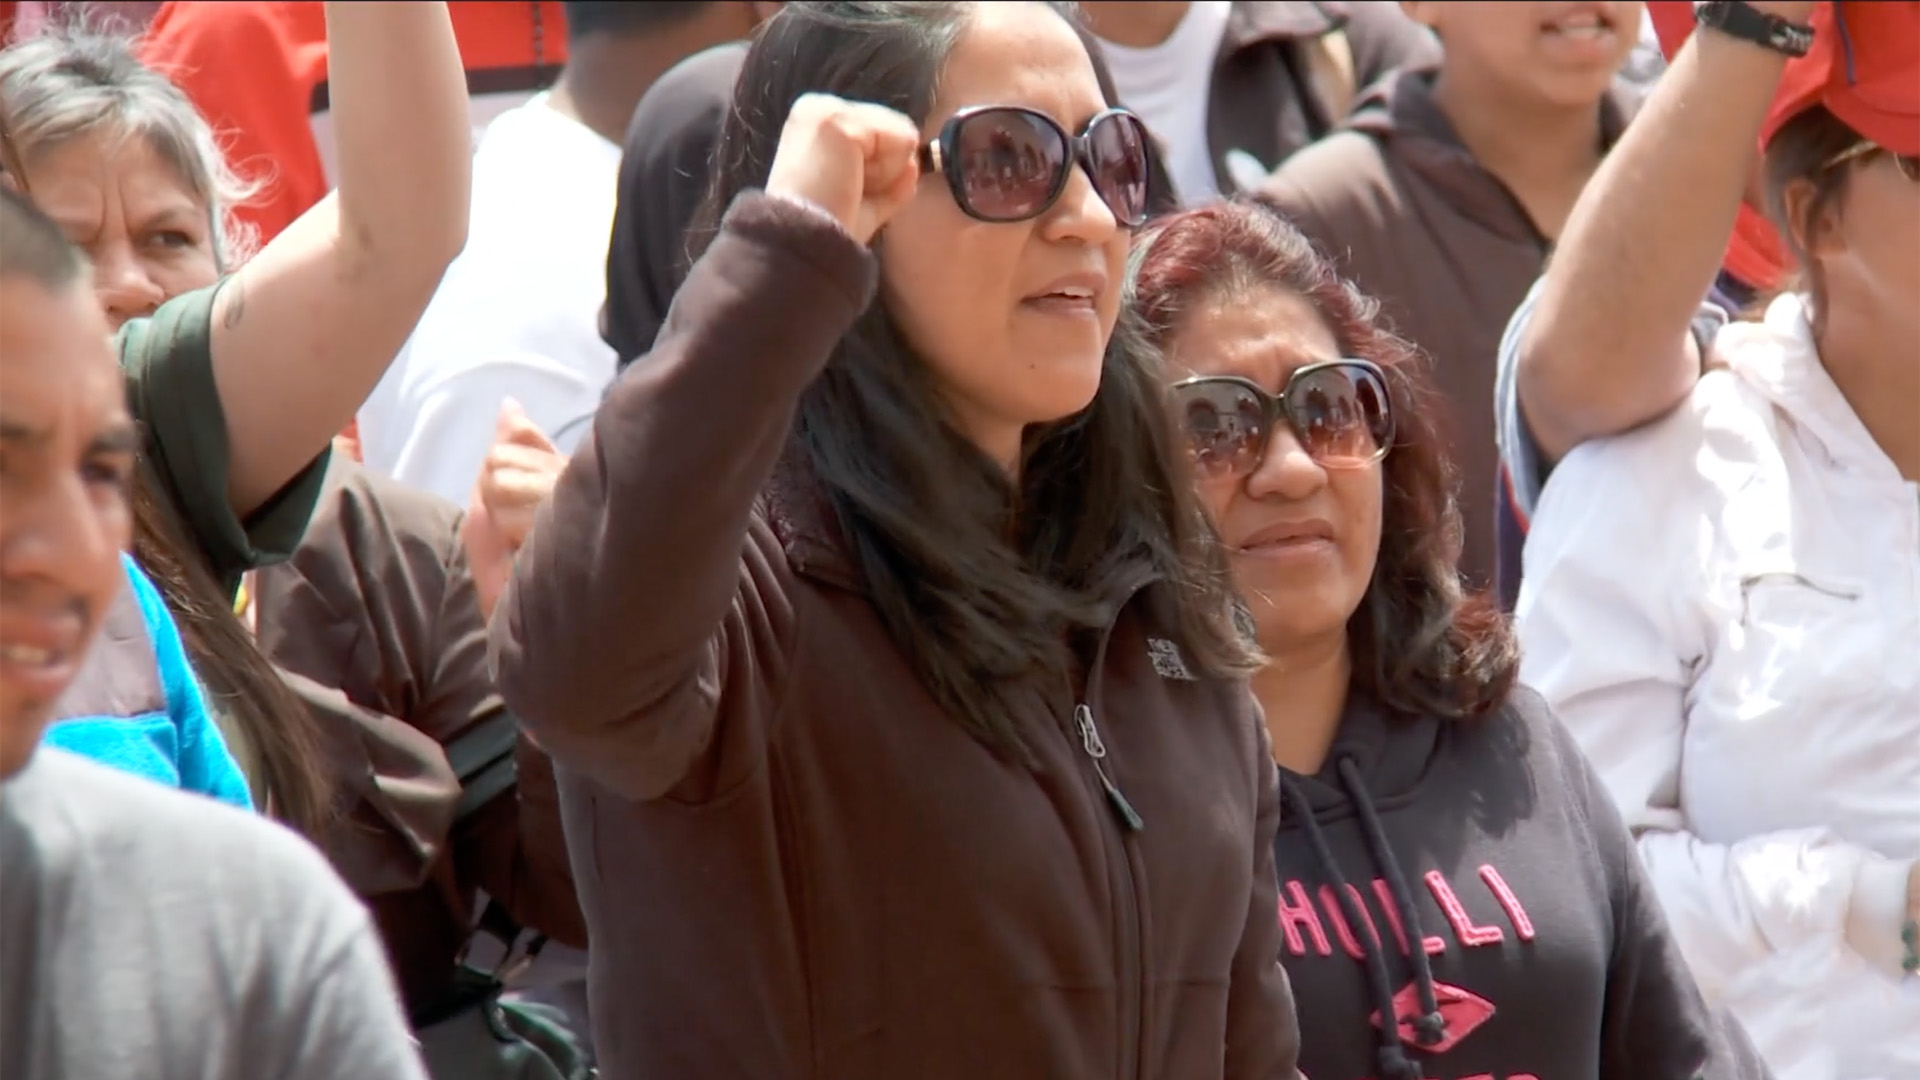 A group of Latina/o/e people in Wisconsin stand in protest. In the foreground, a young Latina woman raises her fist.